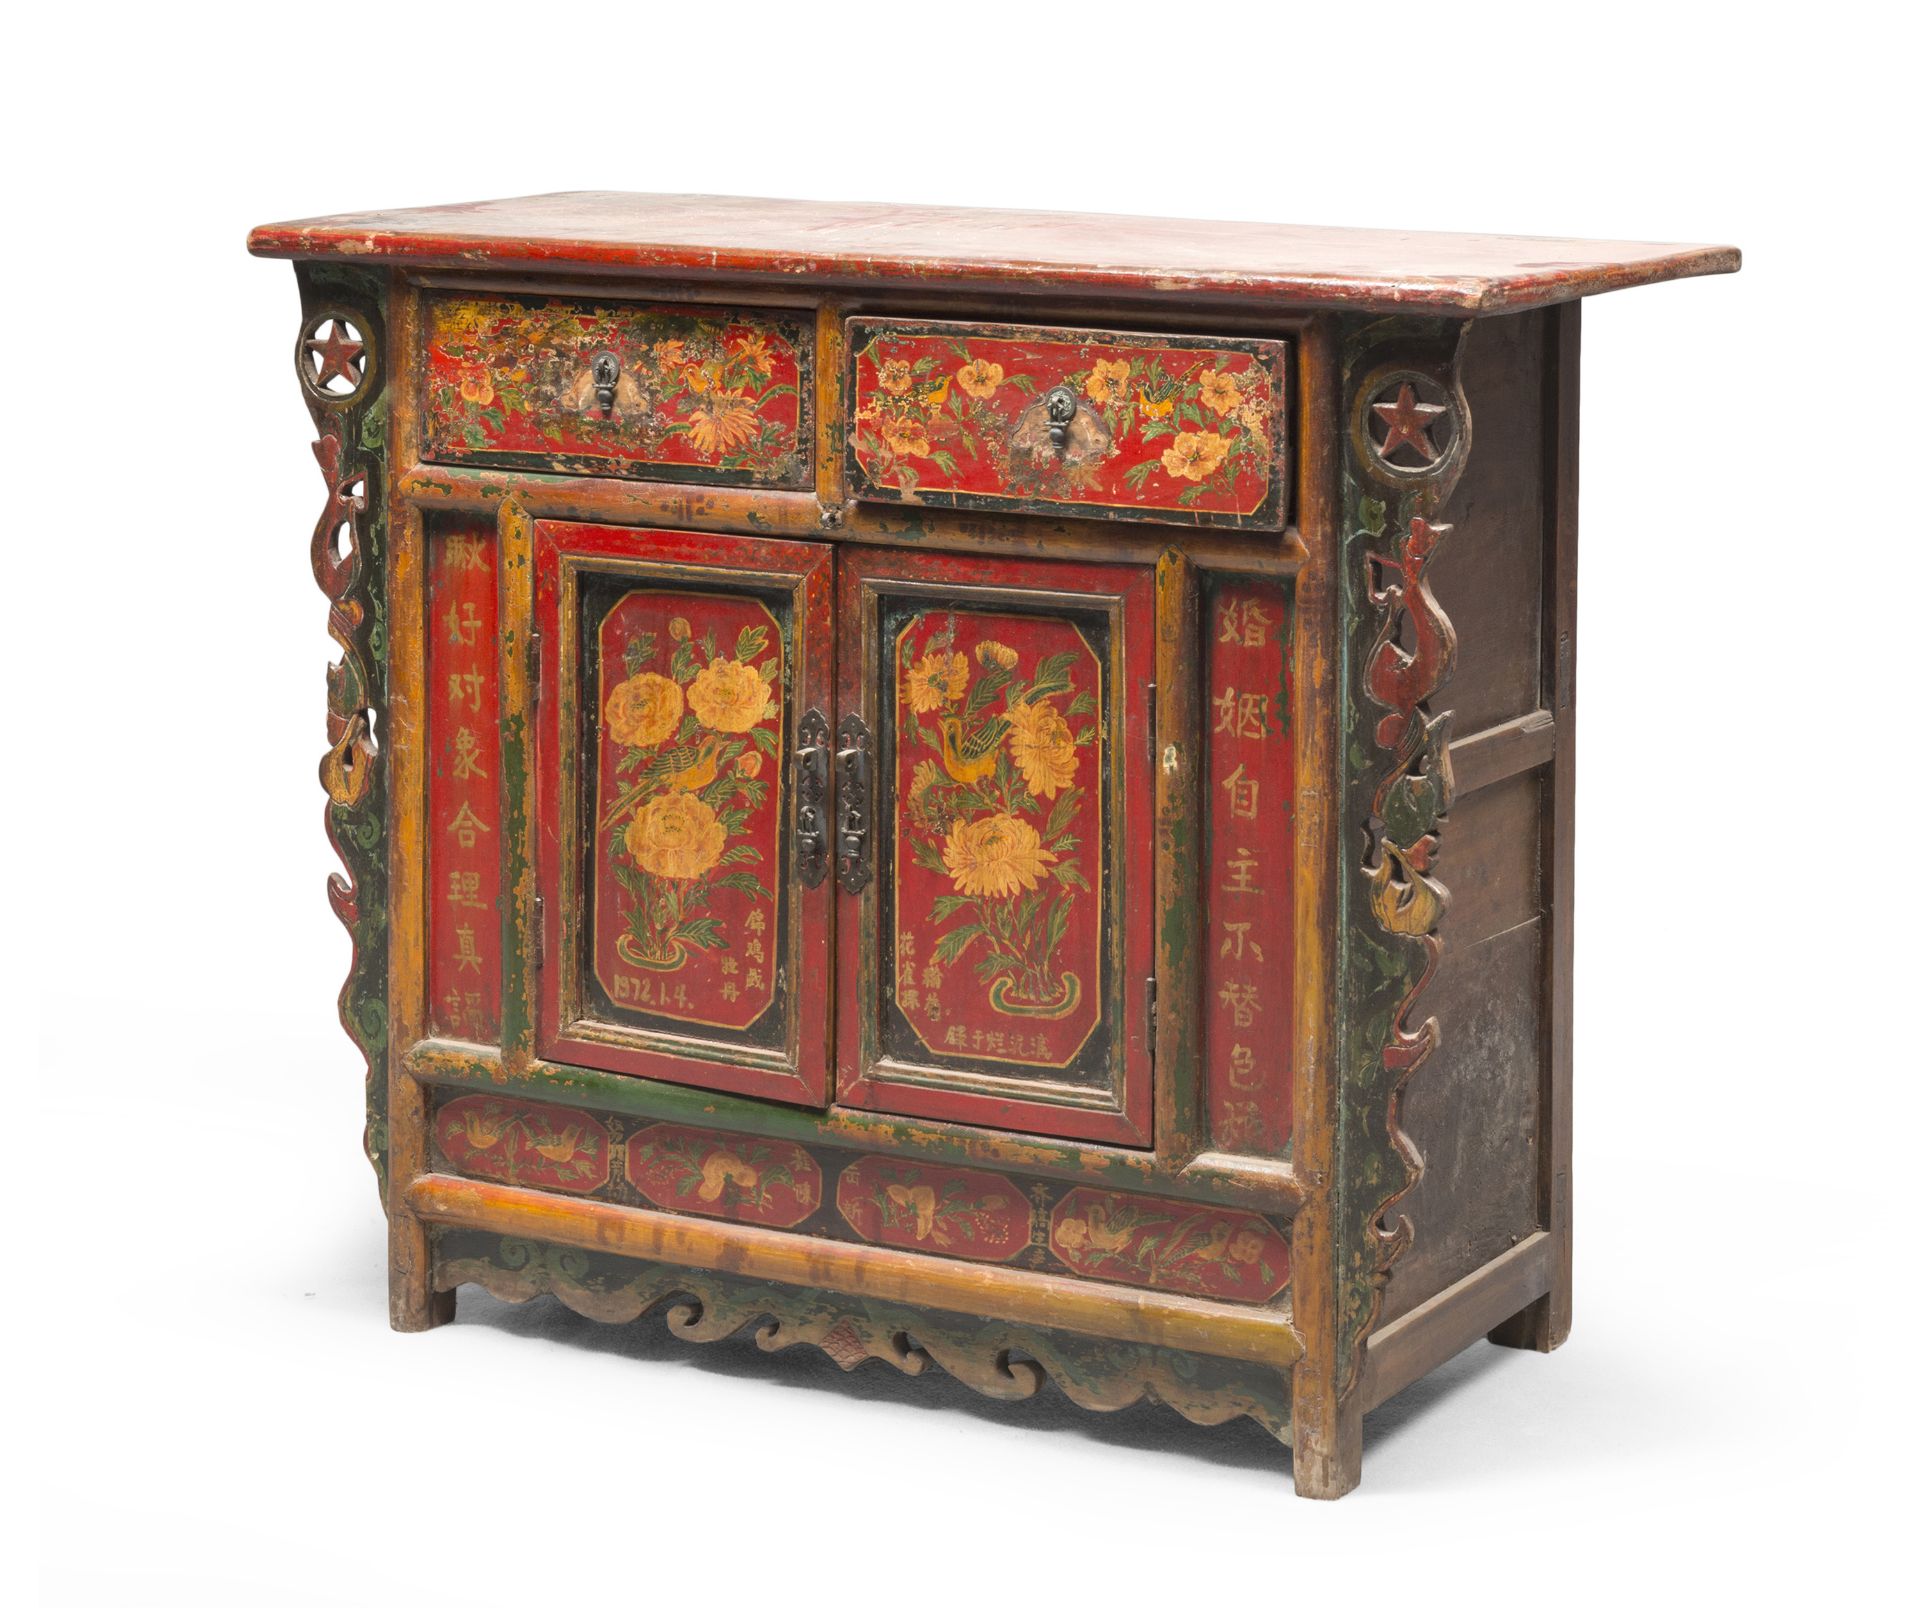 SMALL LACQUERED WOODEN SIDEBOARD MONGOLIA CULTURAL REVOLUTION PERIOD